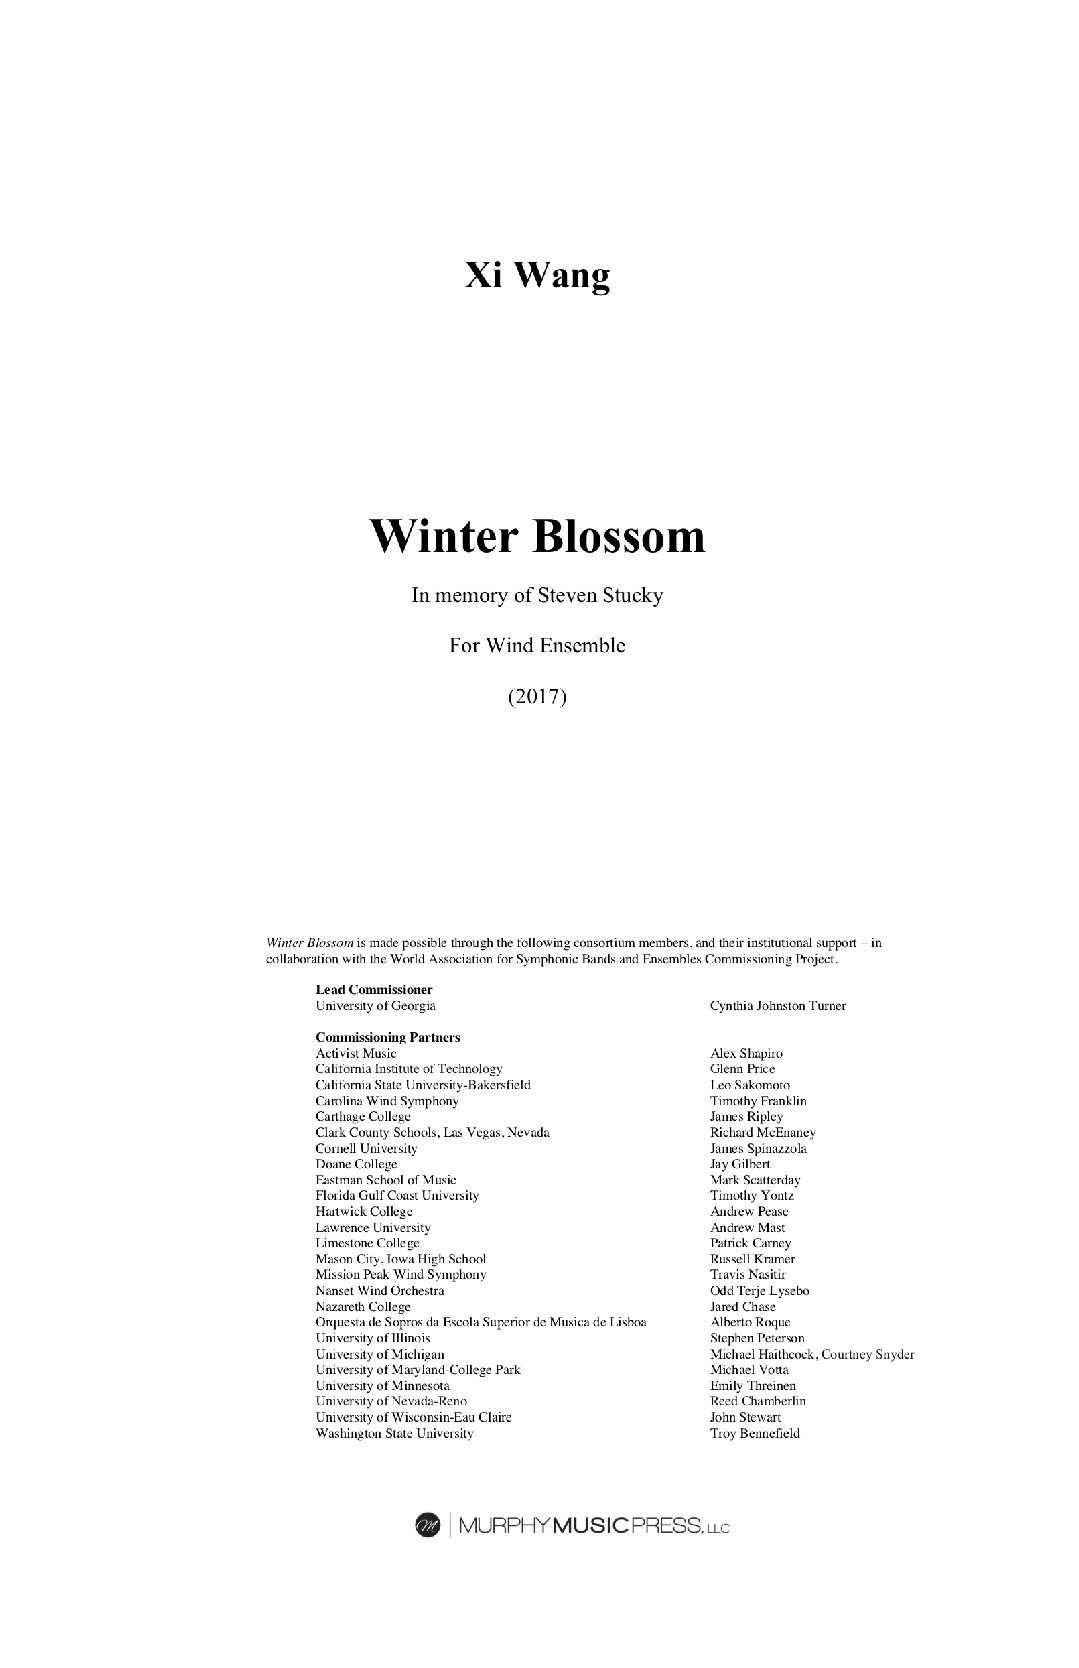 Winter Blossom (Parts Rental Only) by Xi Wang